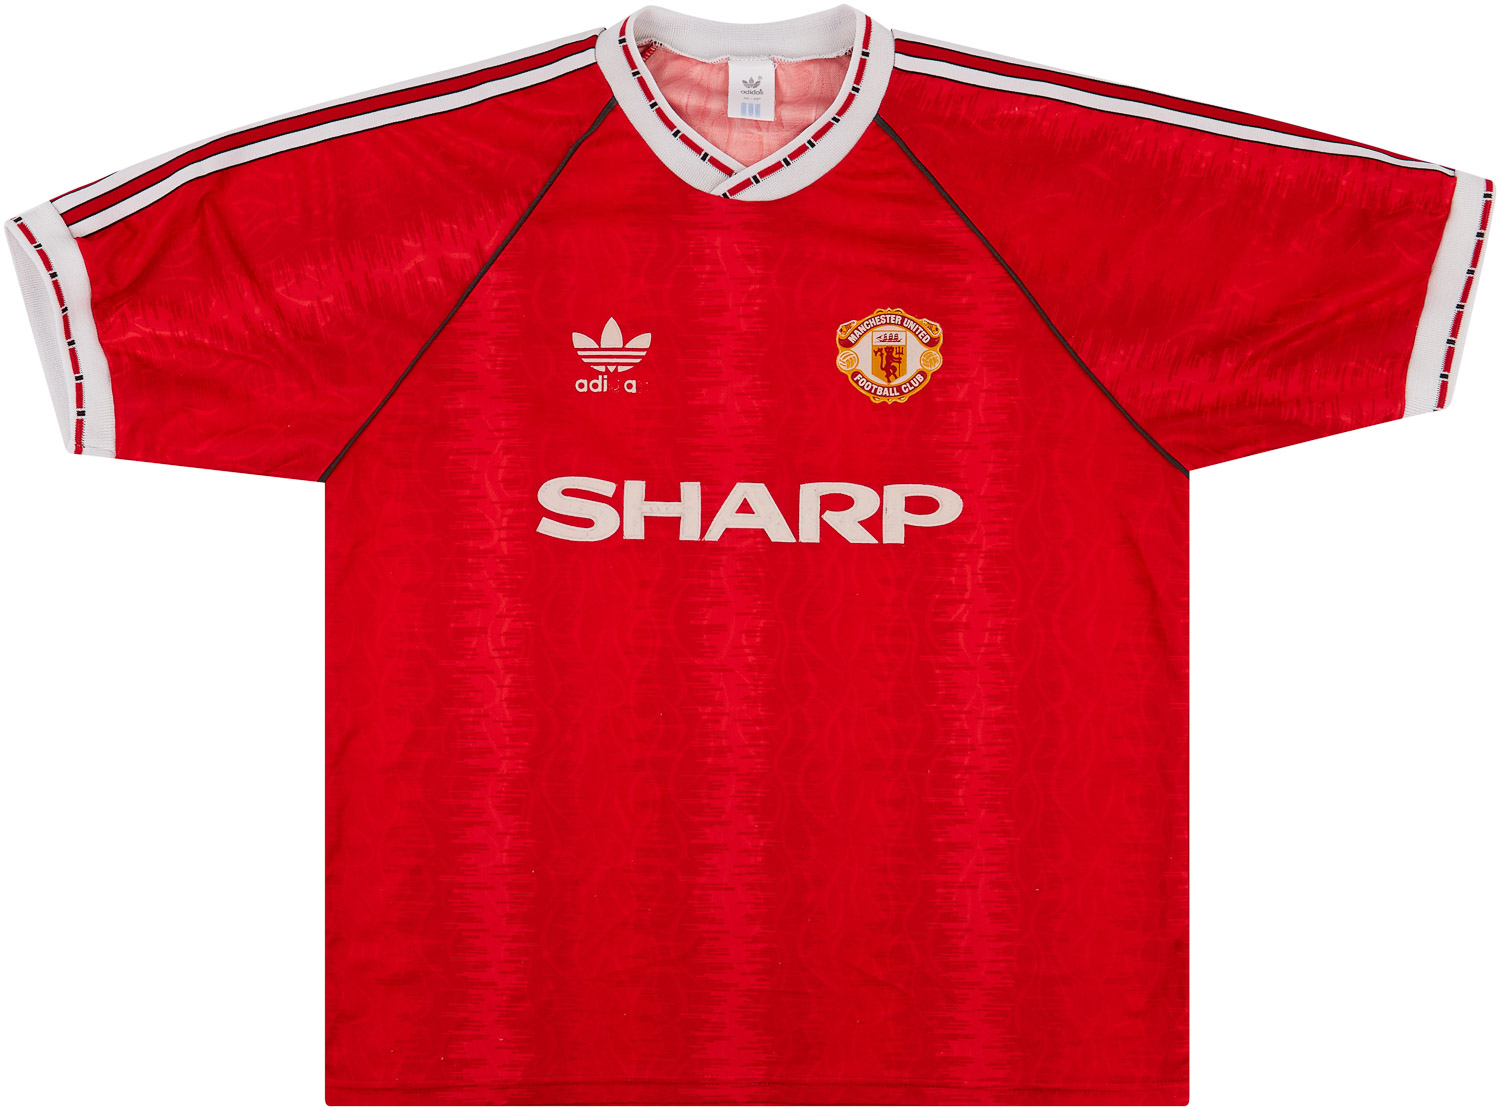 1990-92 Manchester United Home Shirt - 5/10 - (/)